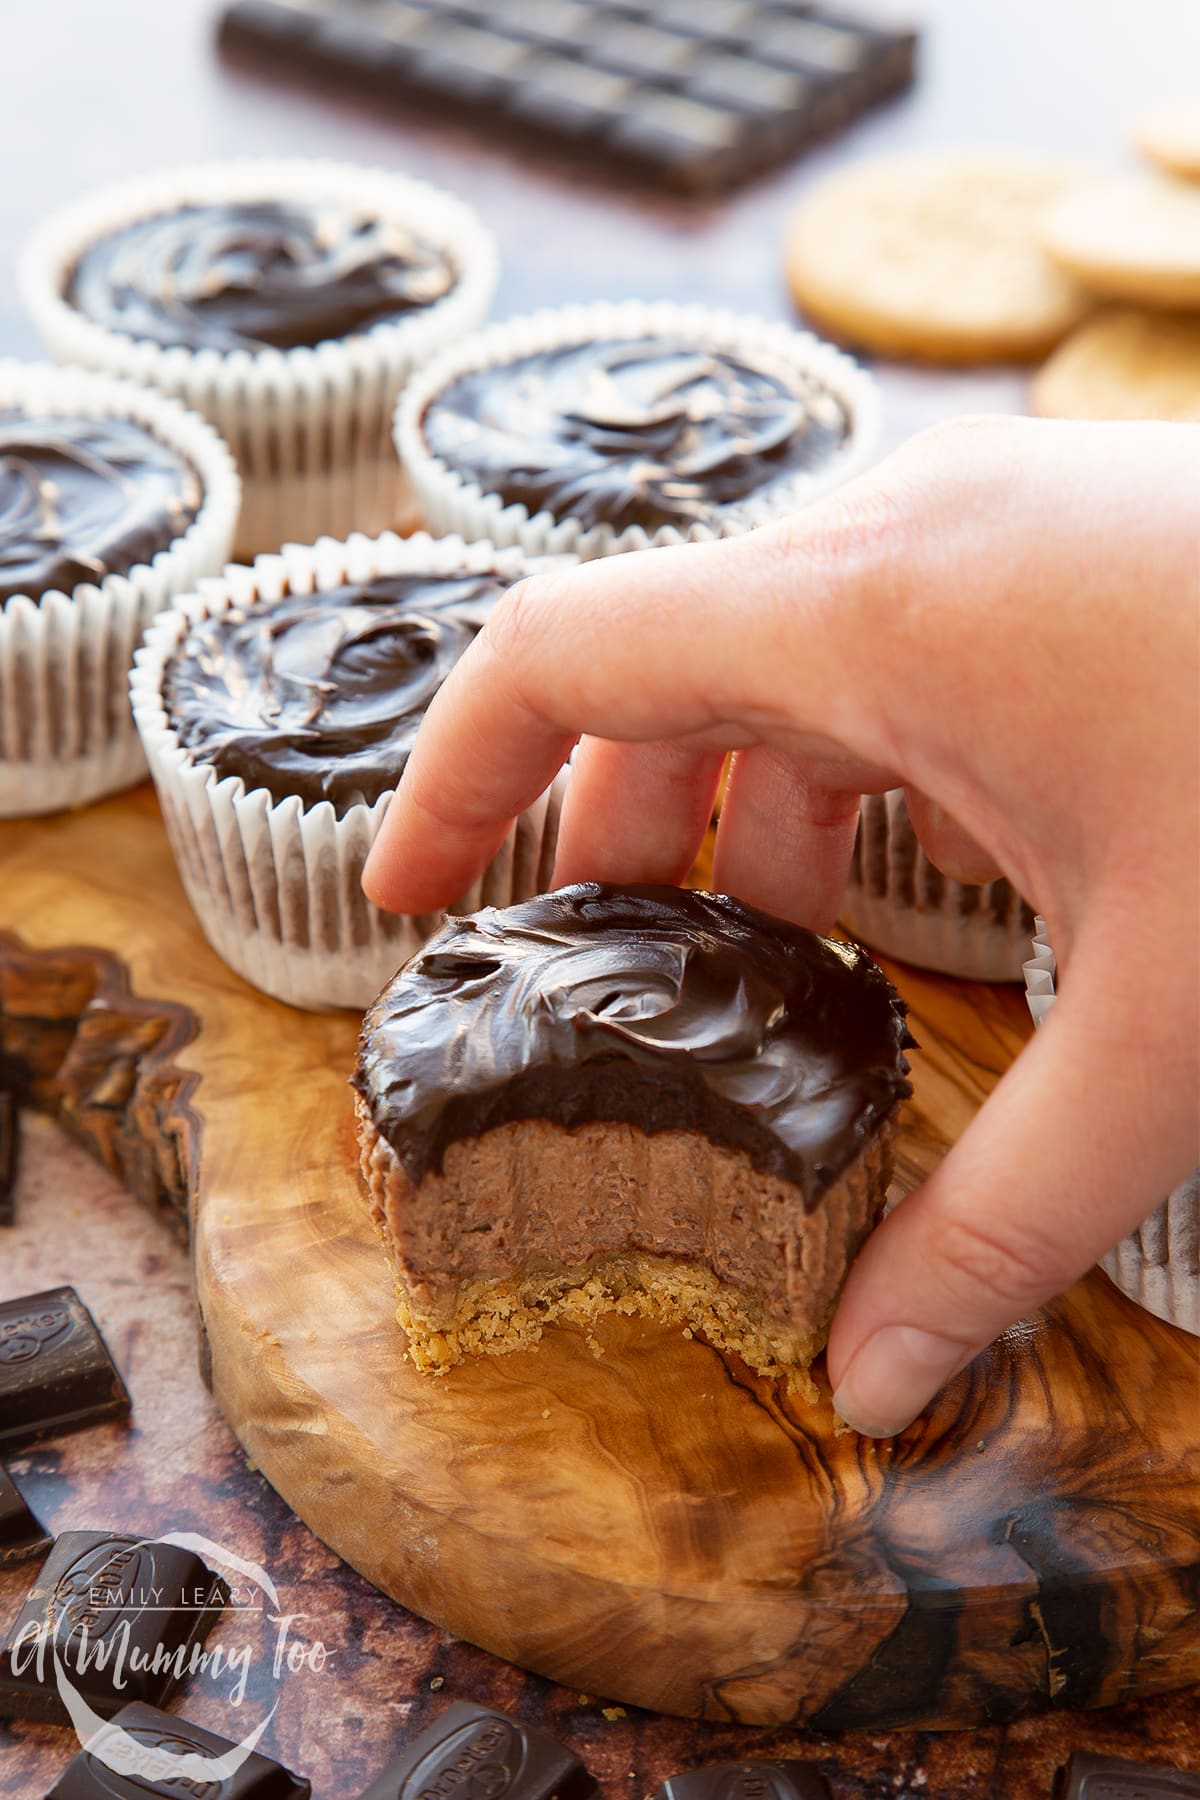 Chocolate cheesecake cupcakes in rows on an olive wood board. The one in the foreground has a bite out of it and a hand reaches for it.